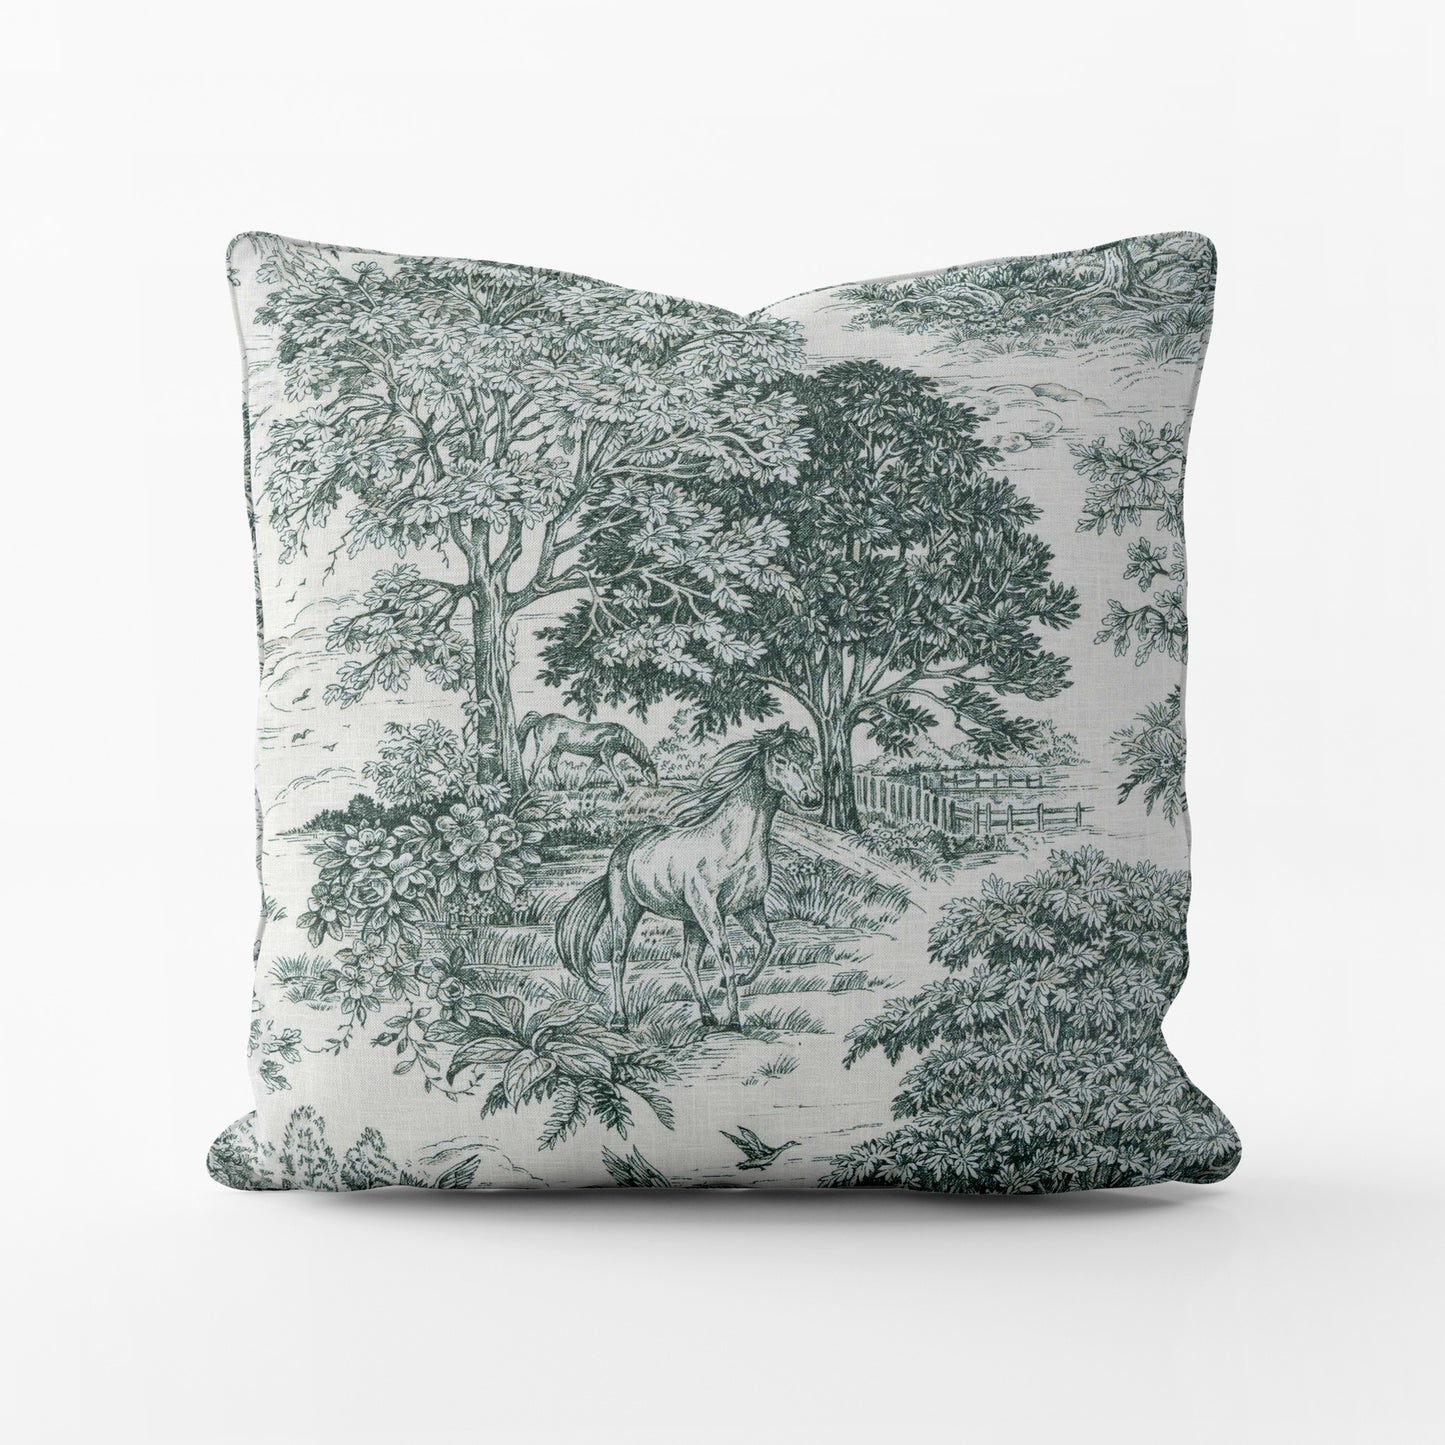 Decorative Pillows in Yellowstone Classic Green Country Toile- Horses, Deer, Dogs- Large Scale